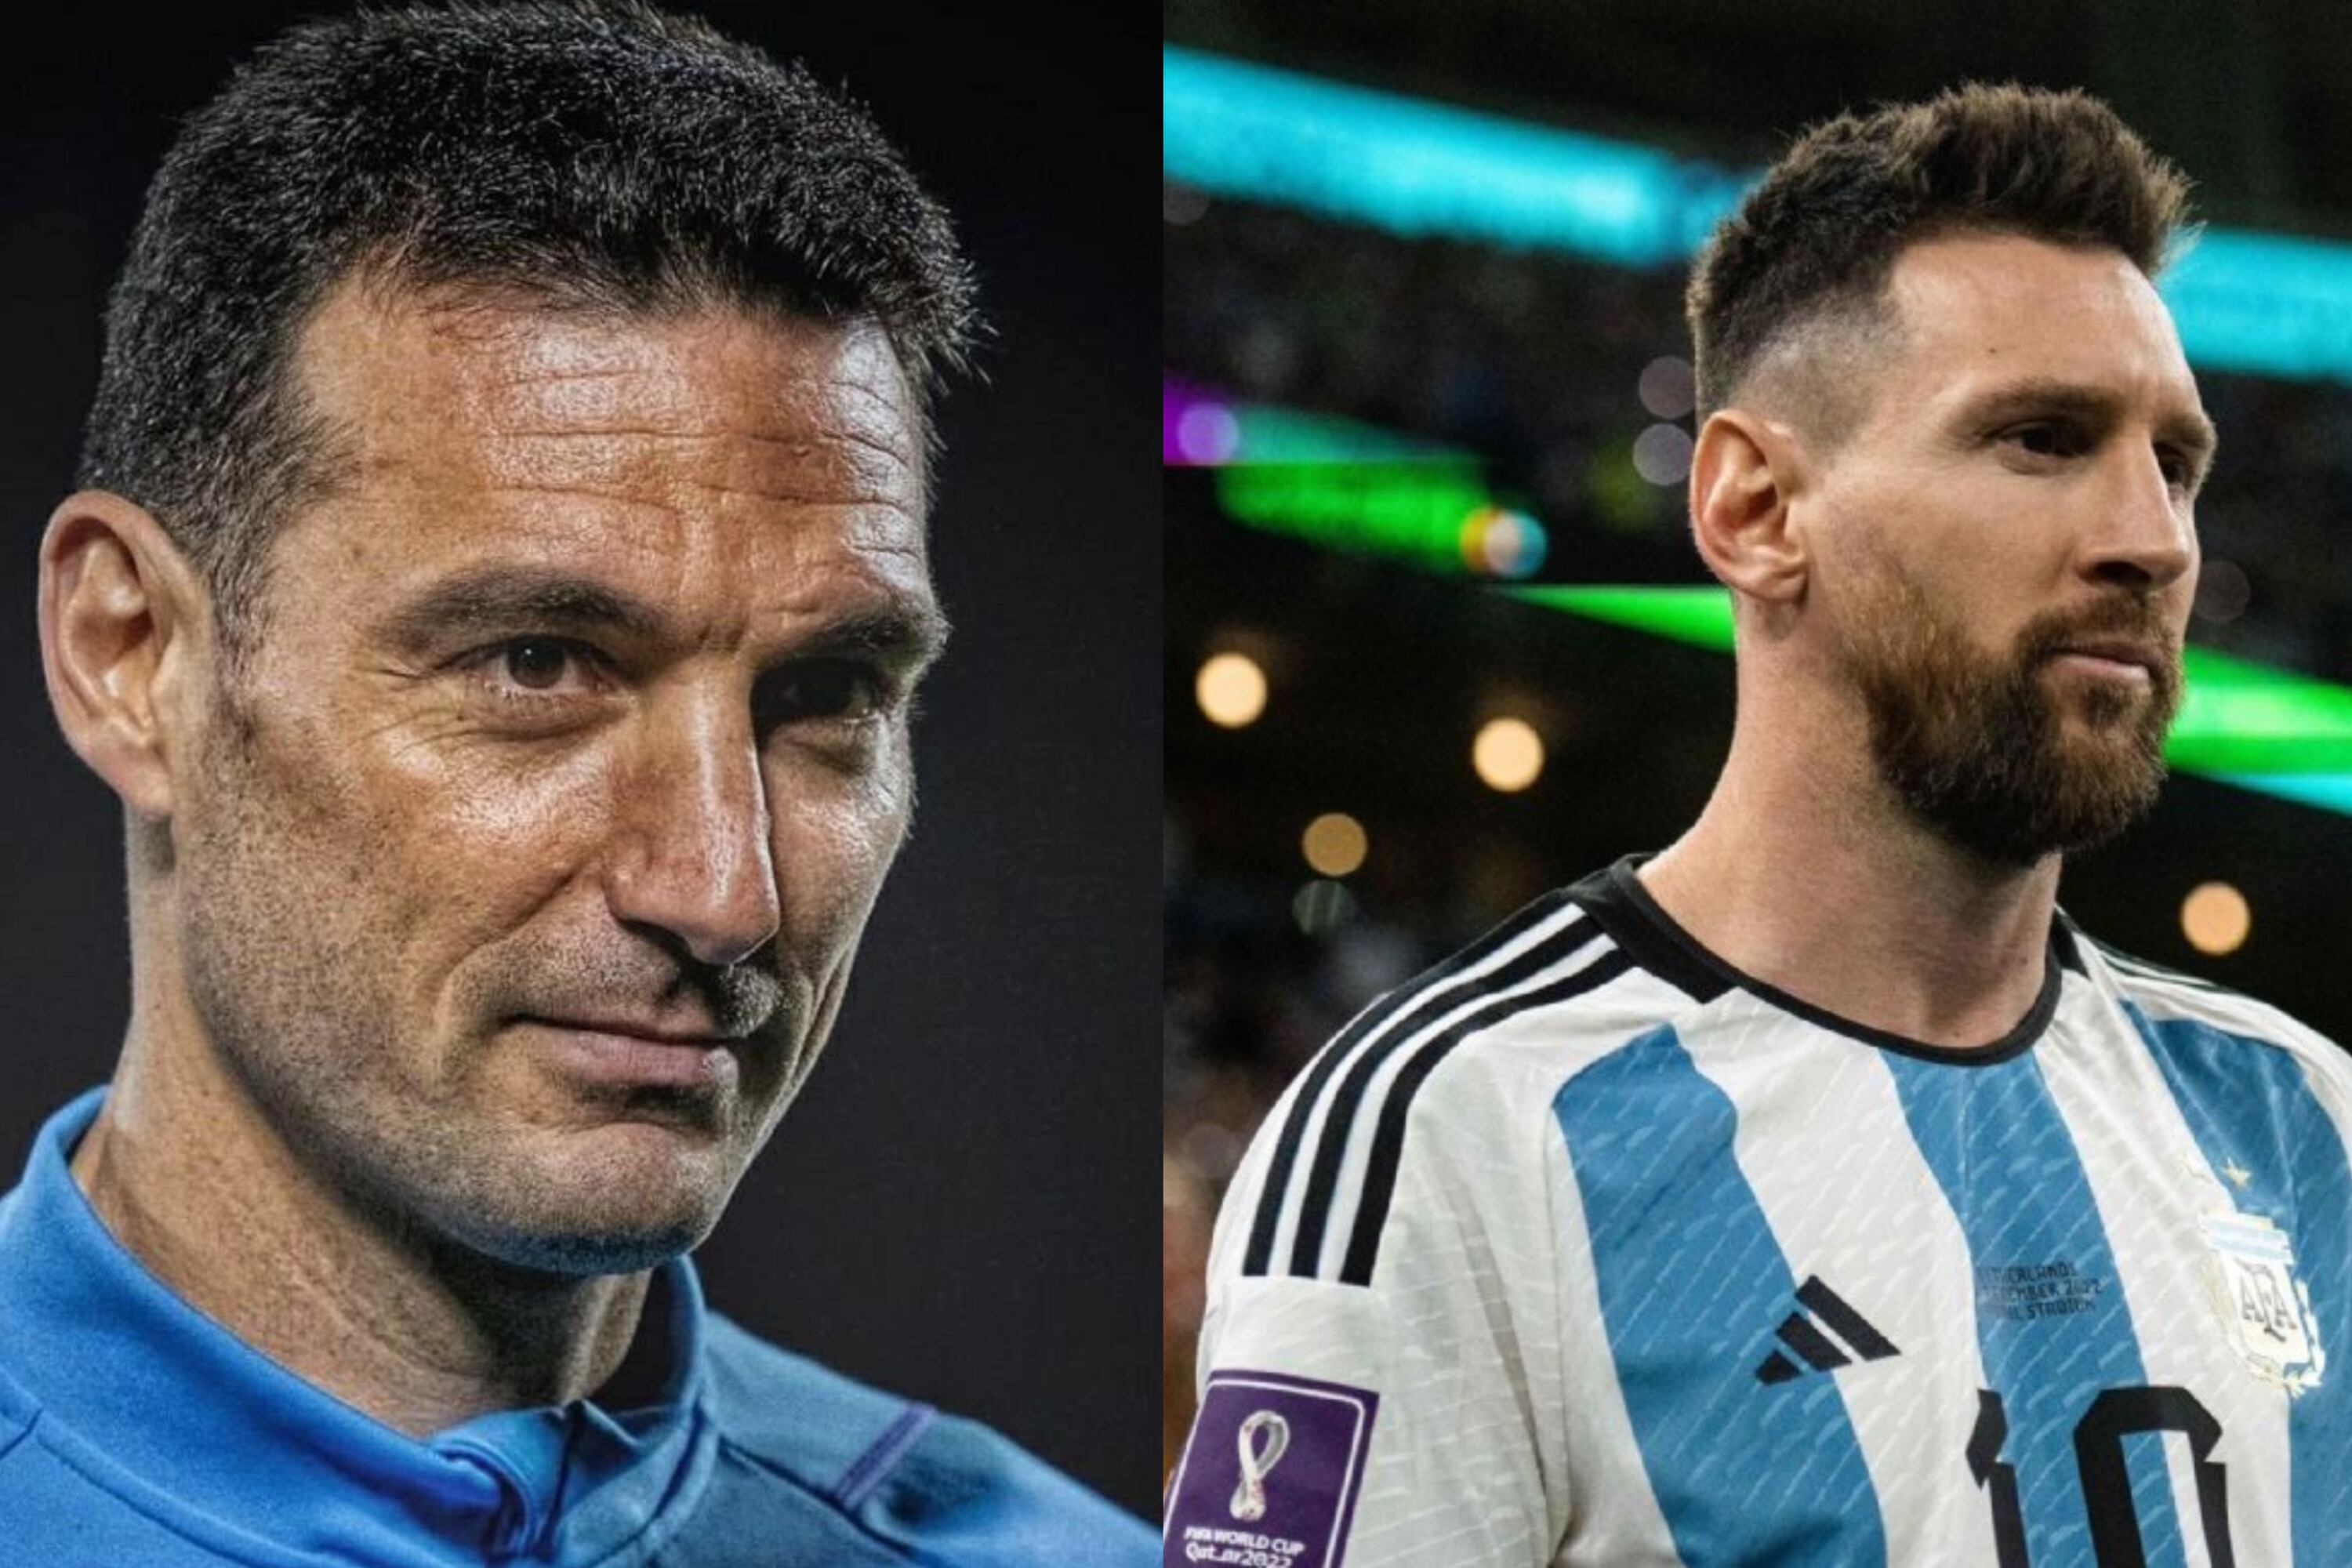 He stays! Scaloni continues in Argentina and reveals until when Messi will play